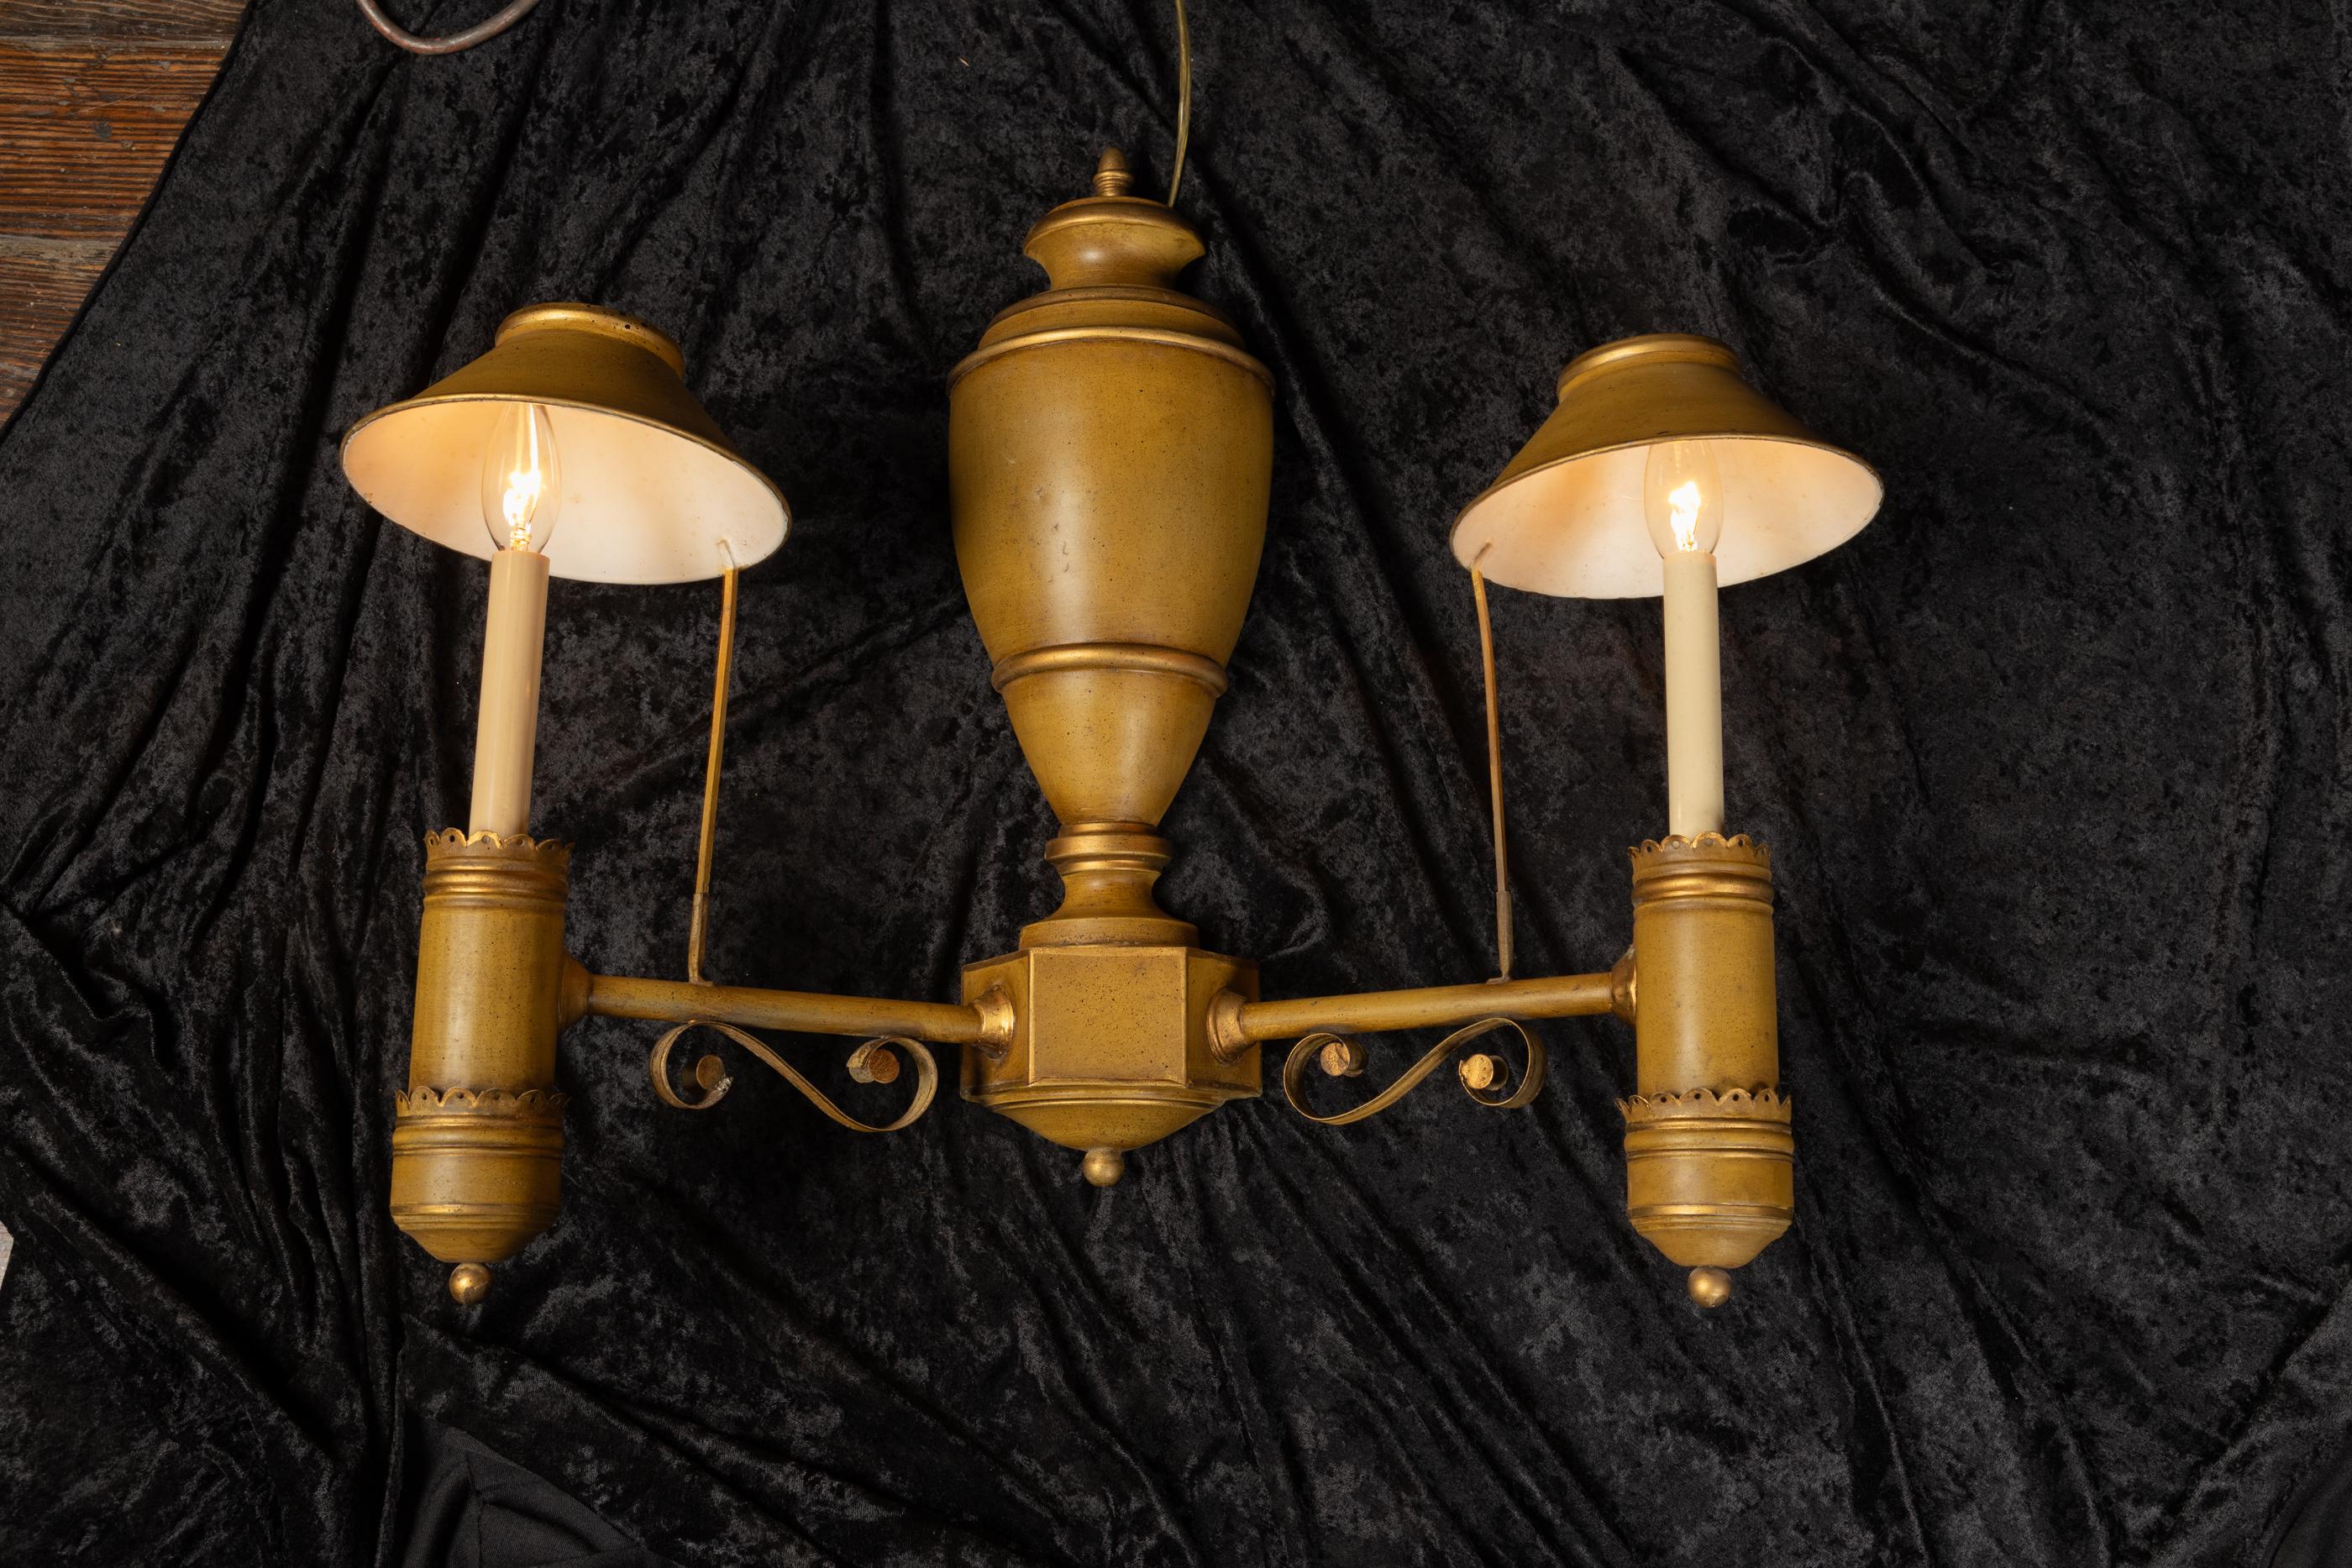 Large Pair of Italian Mid-20th Century Tole Sconces with Light Shades For Sale 1